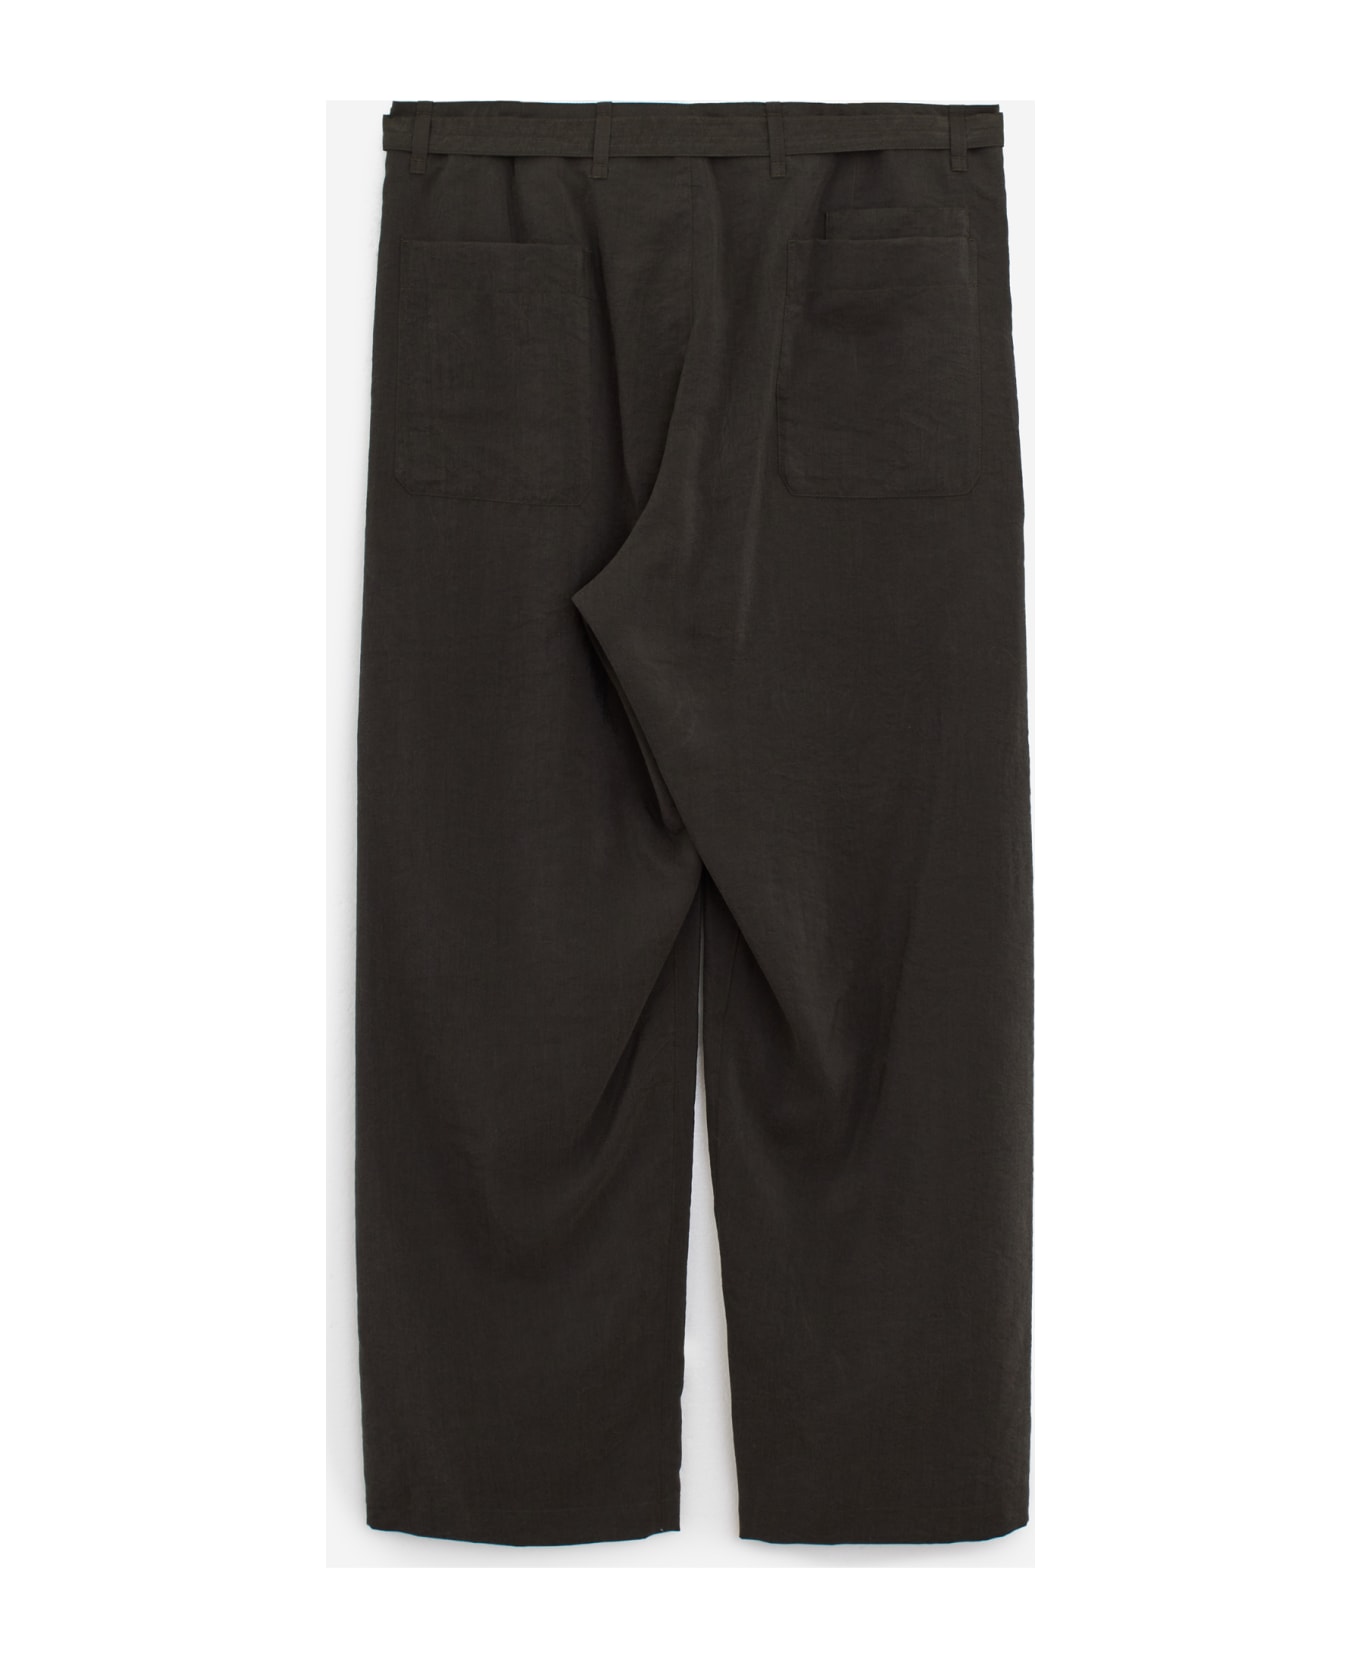 Lemaire Seamless Belted Pants - brown